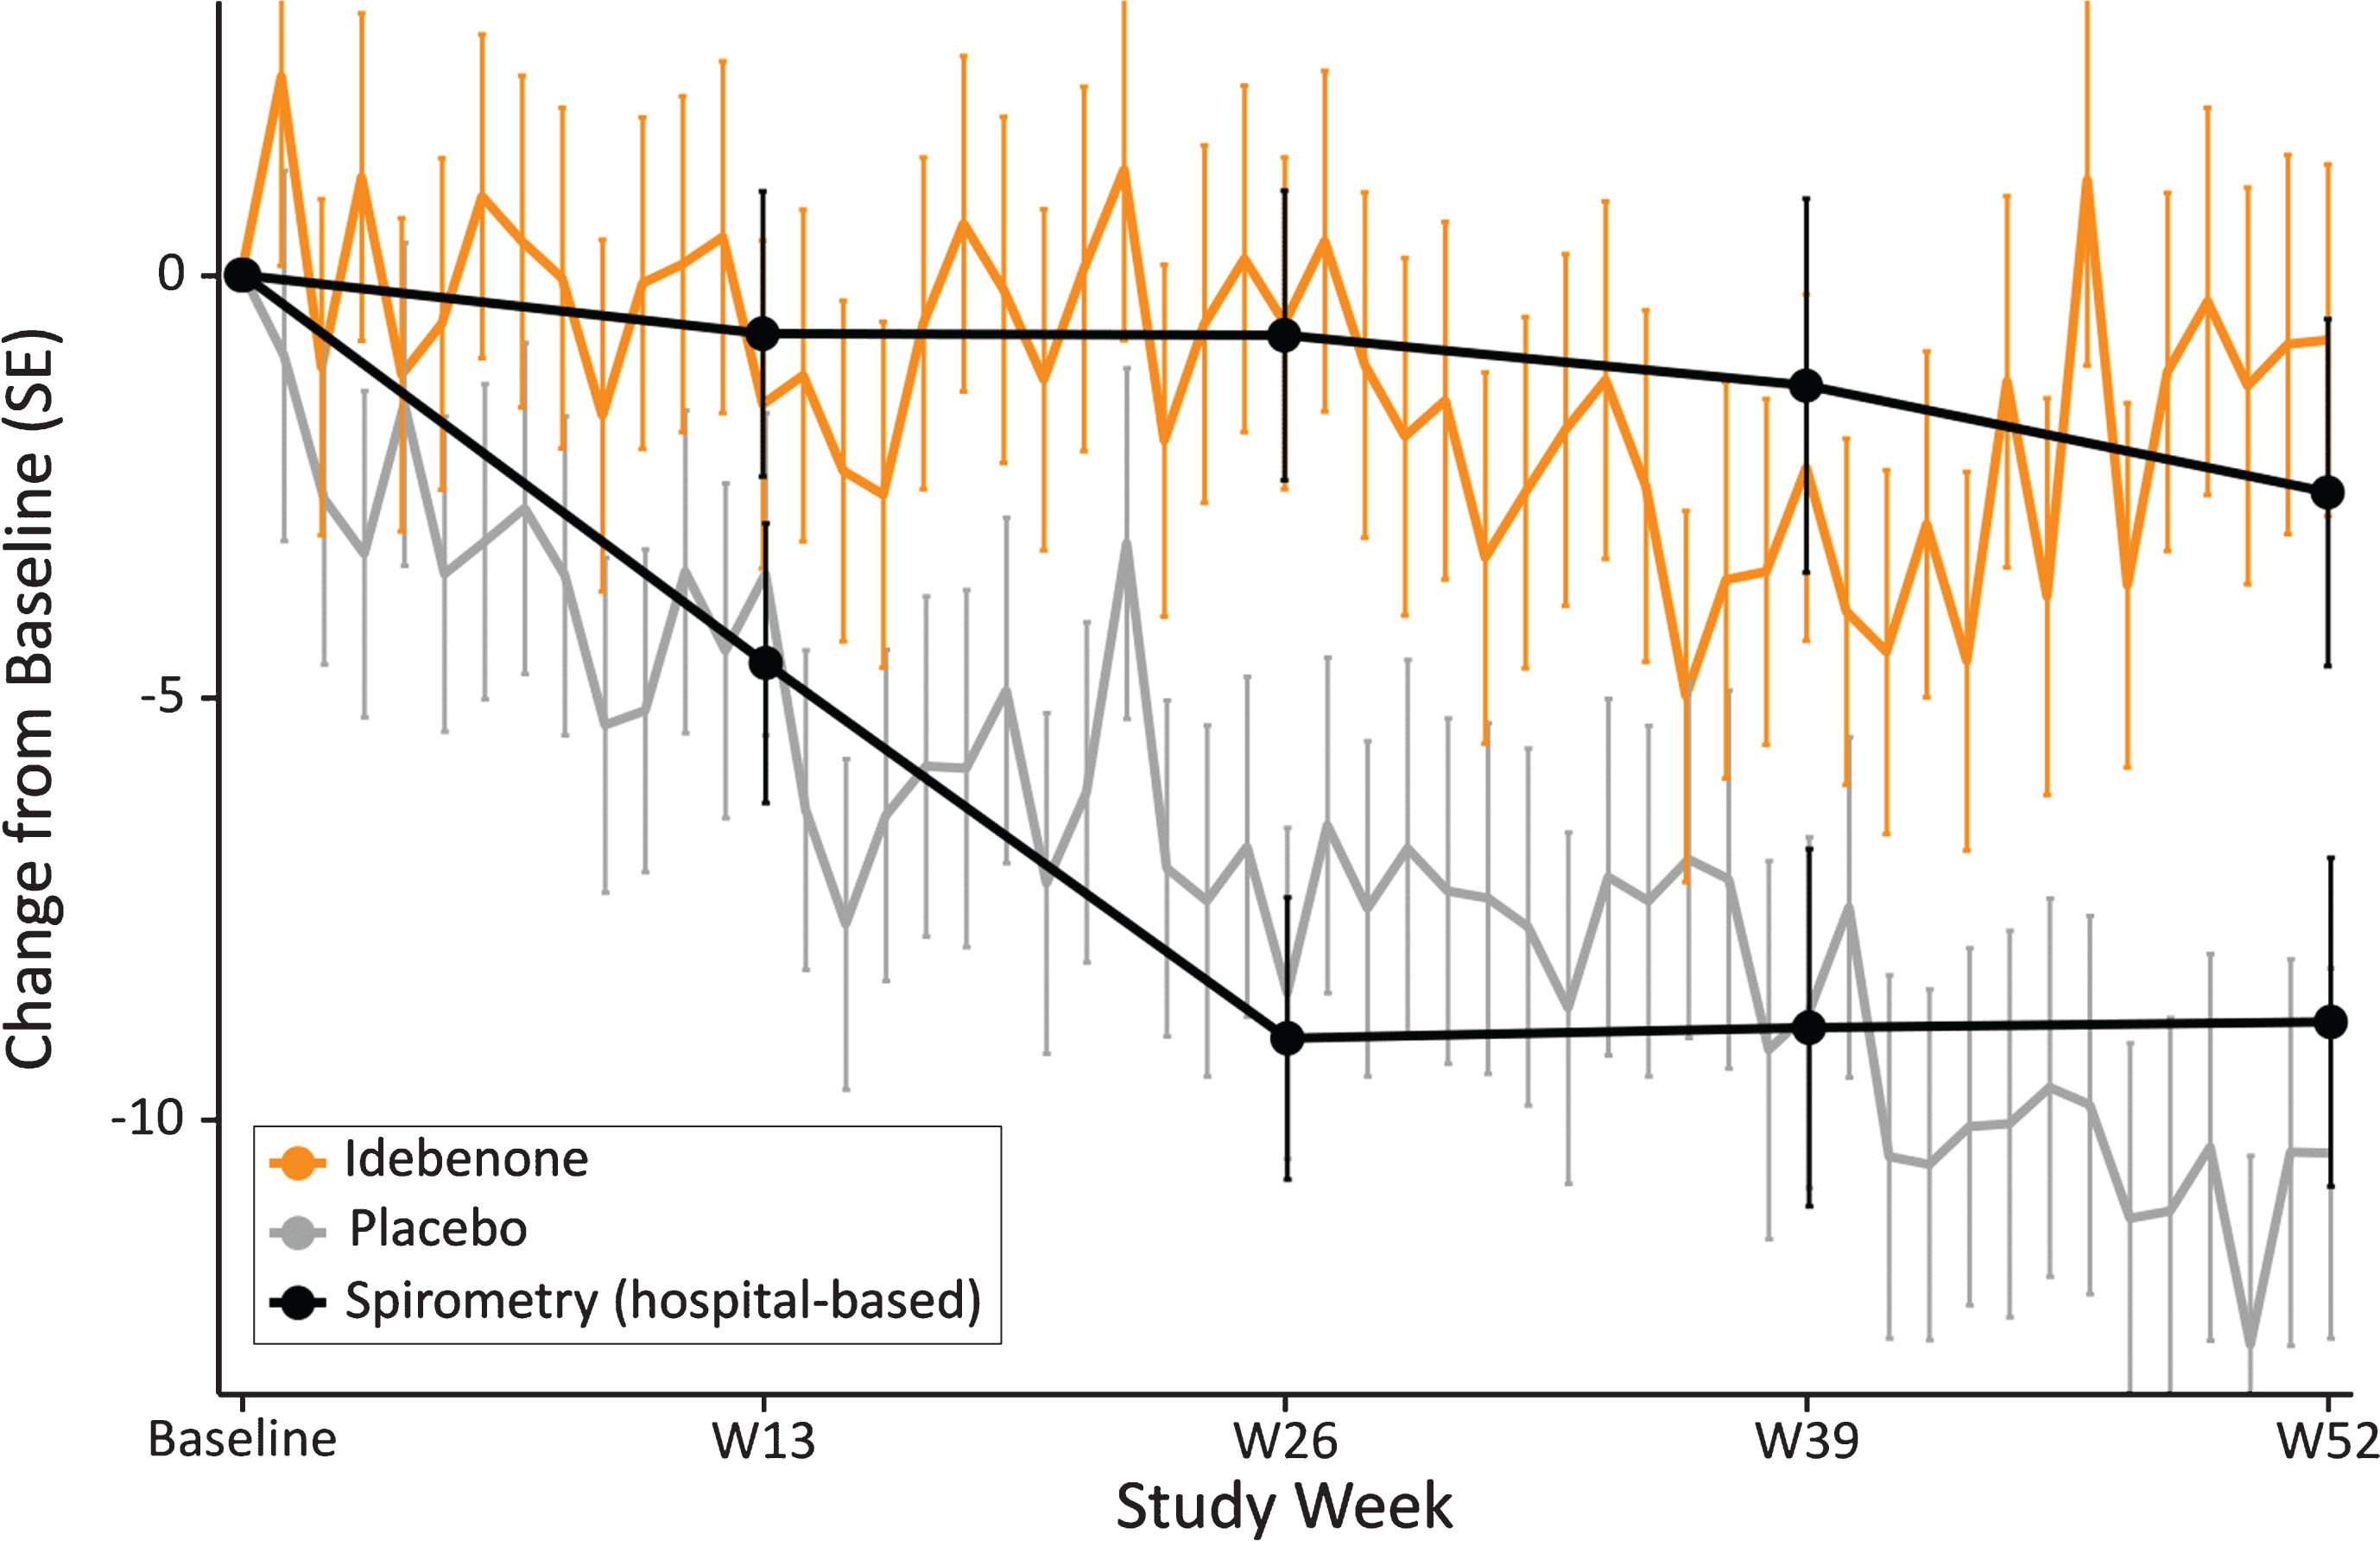 Change in PEF% p obtained by weekly HHD compared with hospital-based spirometry results by treatment group.